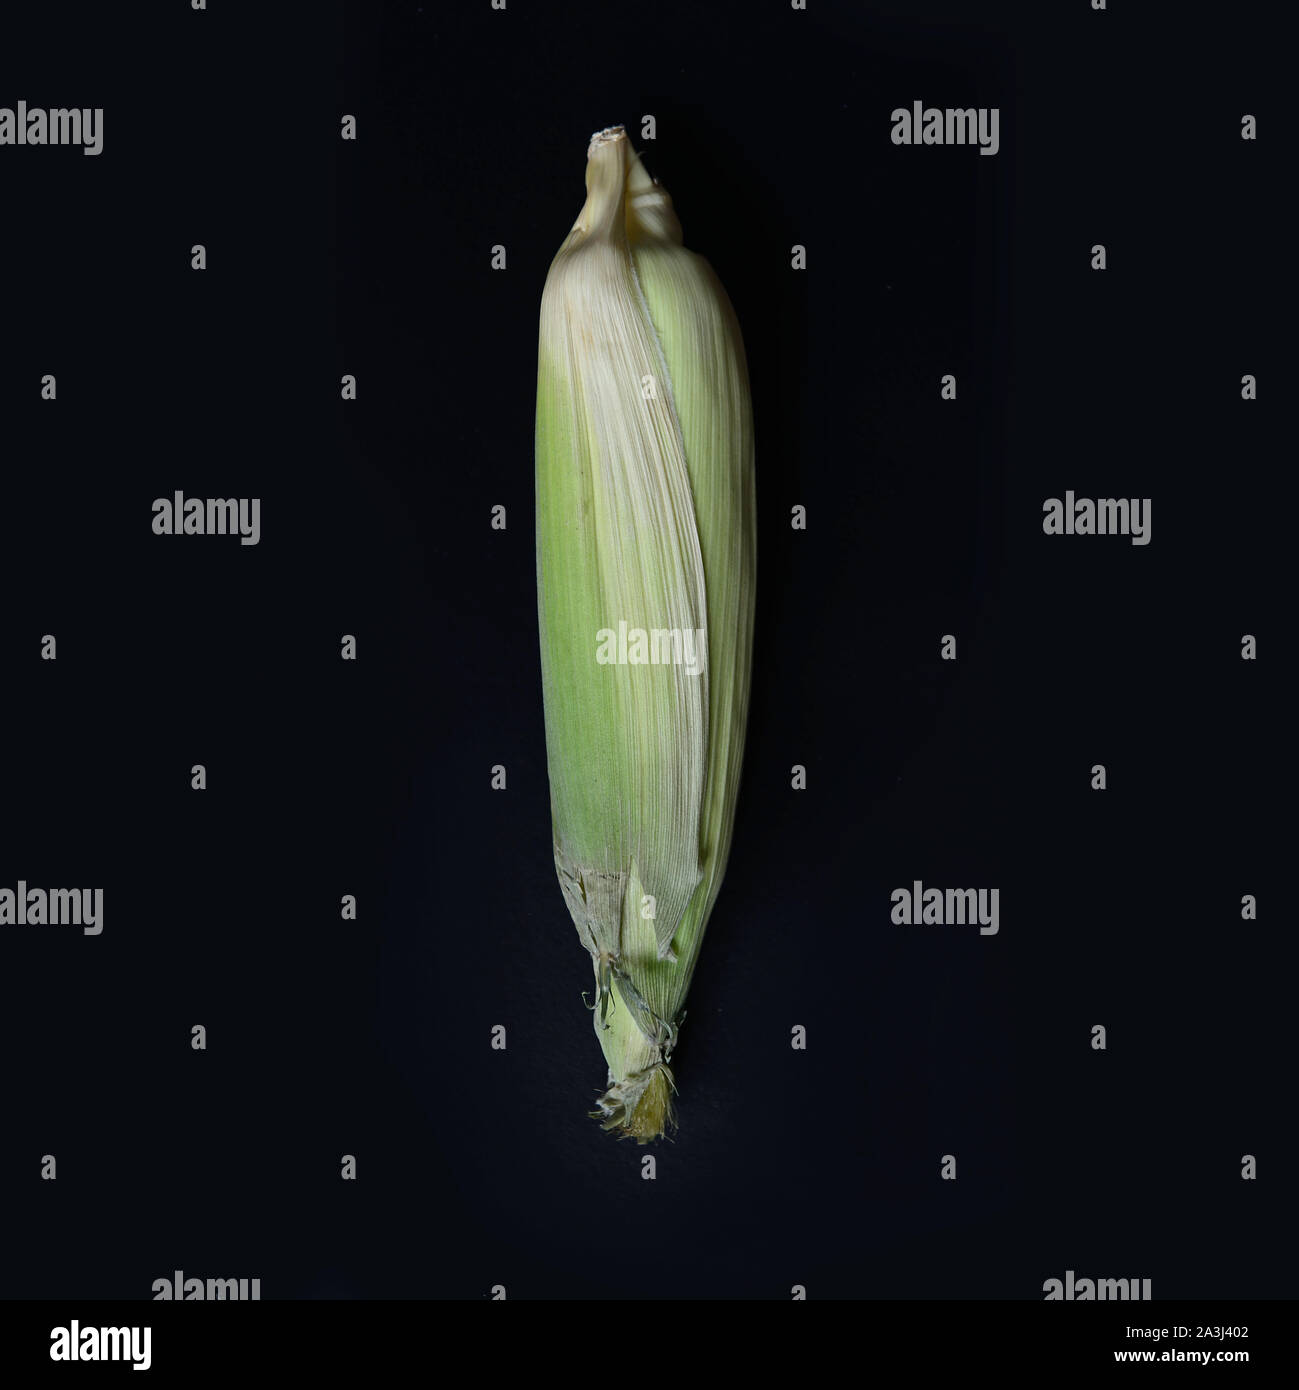 Creative layout made of fresh organic sweet corn from the farm isolate on black background with shadow. Top view. Flat lay. Food concept. Macro concep Stock Photo